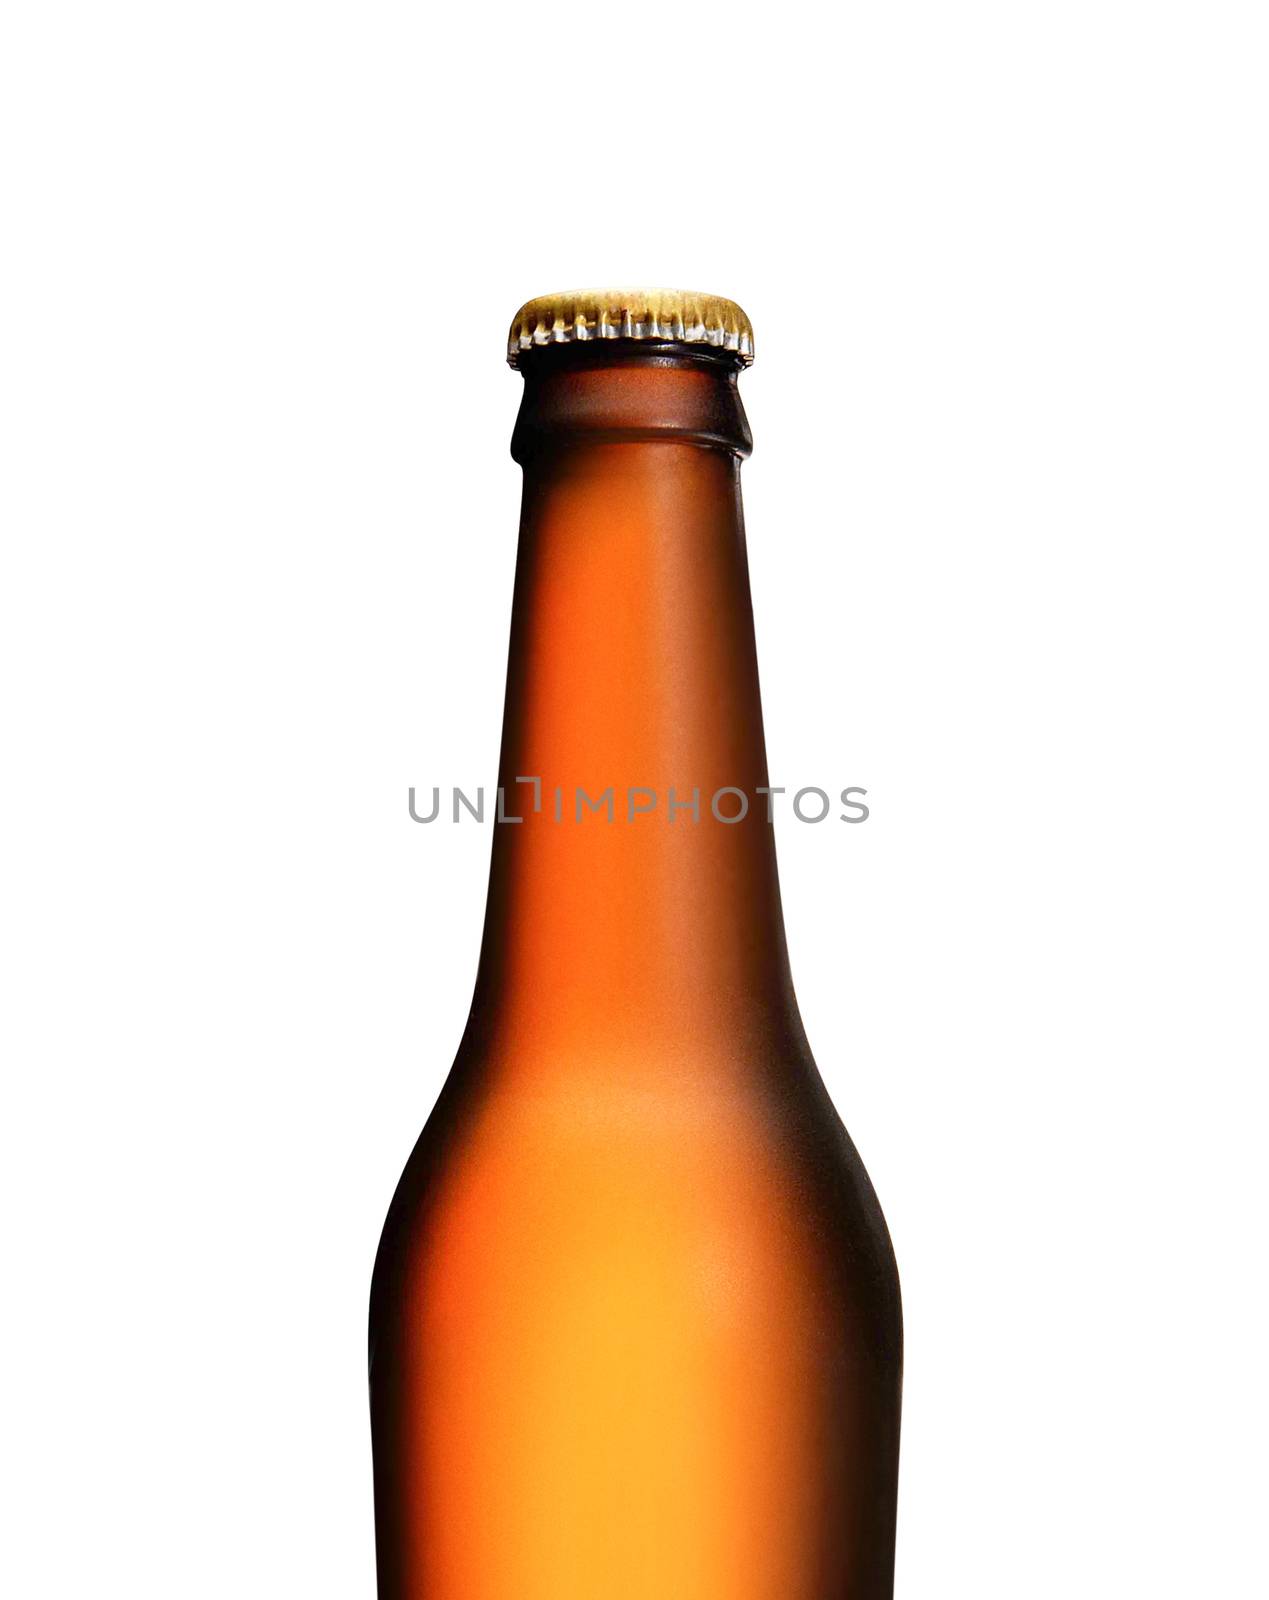 Beer bottle isolated on white by ozaiachin